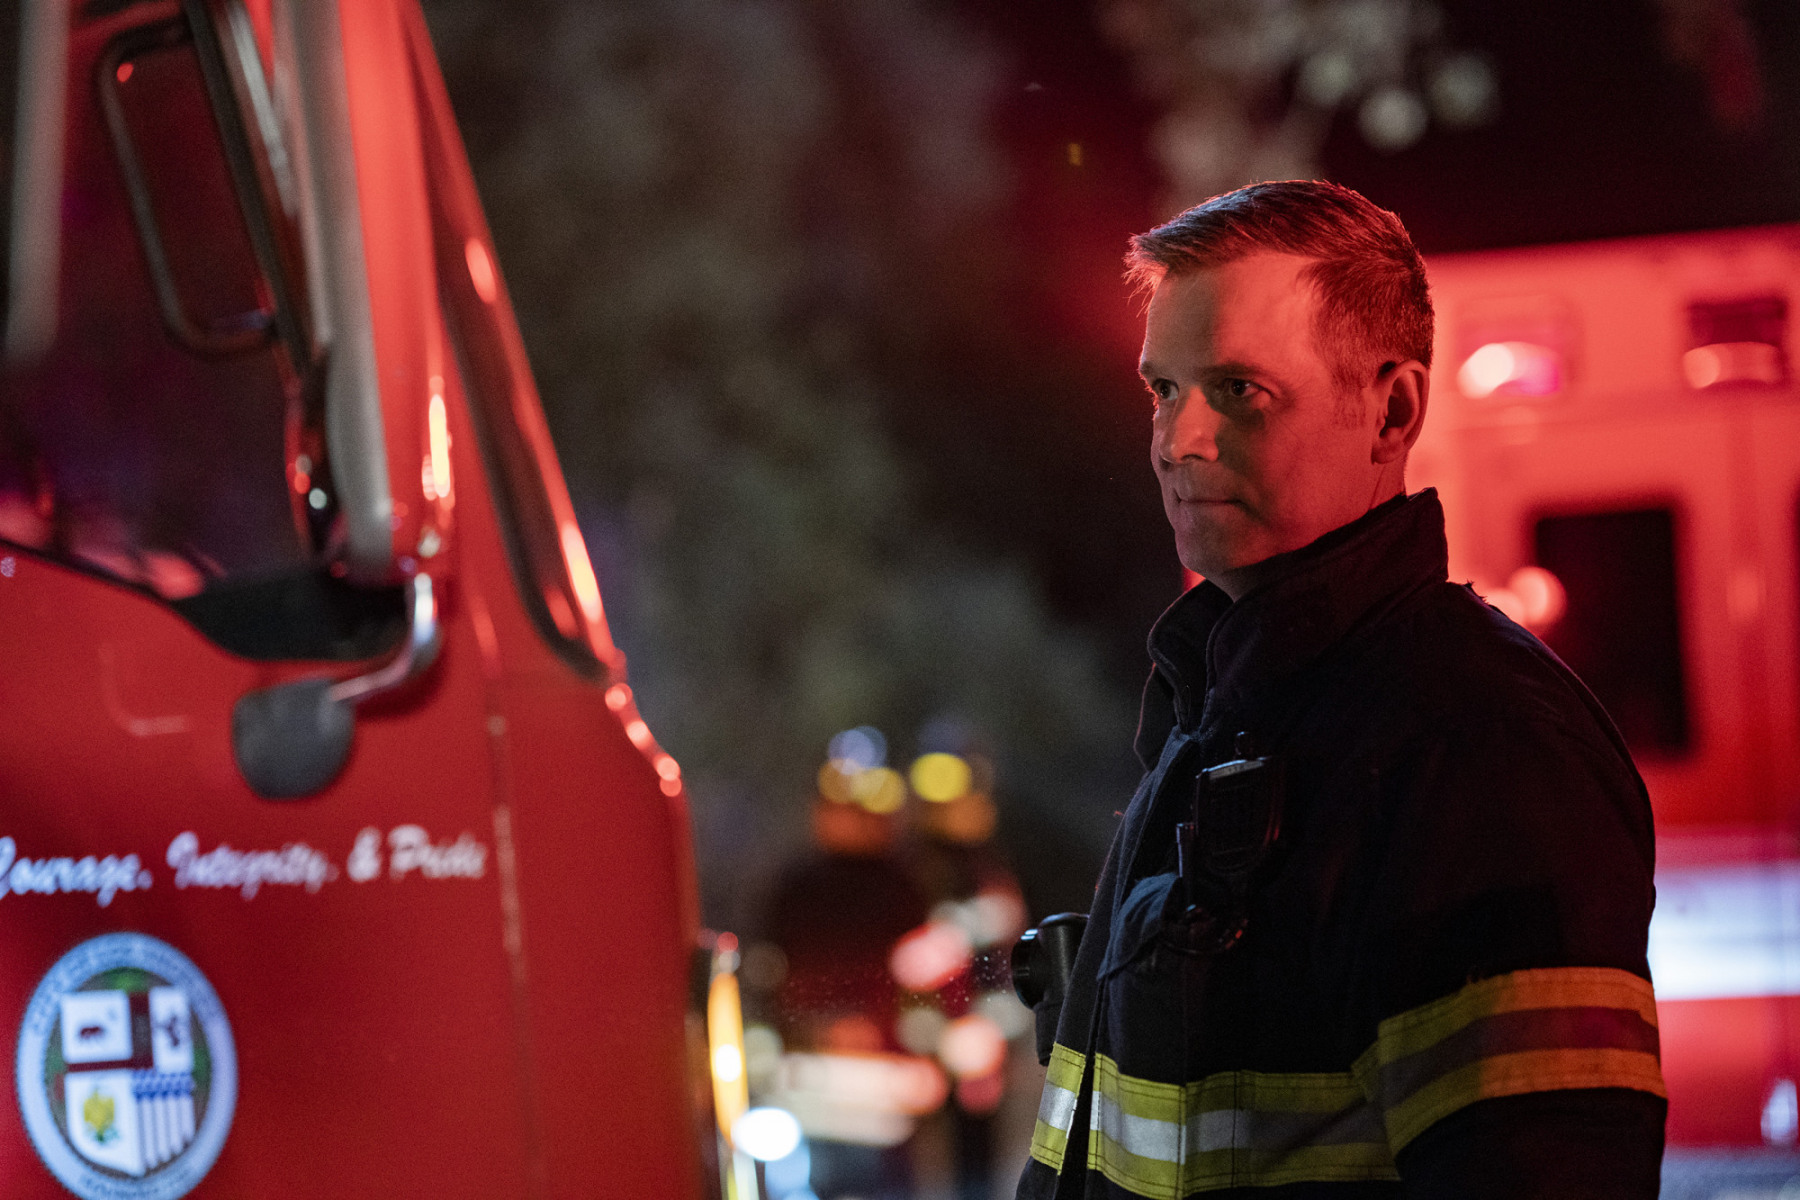 9-1-1: Peter Krause in the “Ghost Stories” episode of 9-1-1 airing Monday, Nov. 8 (8:00-9:00 PM ET/PT) on FOX. CR: Jack Zeman / FOX.